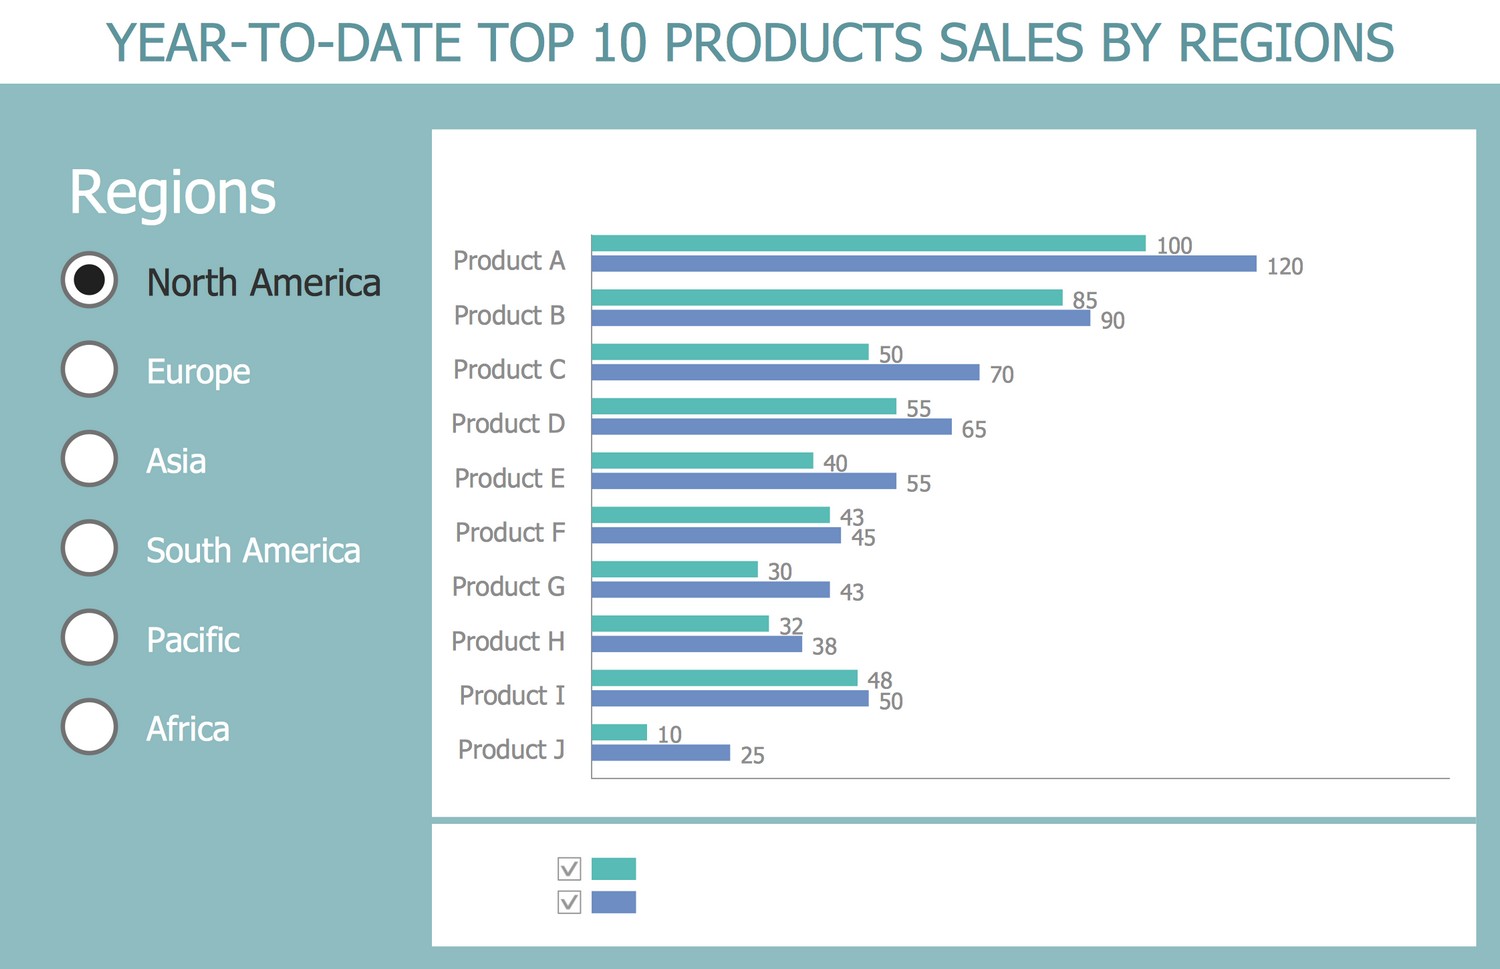 Business Intelligence Dashboard - Year-to-date Top 10 Products Sales by Regions